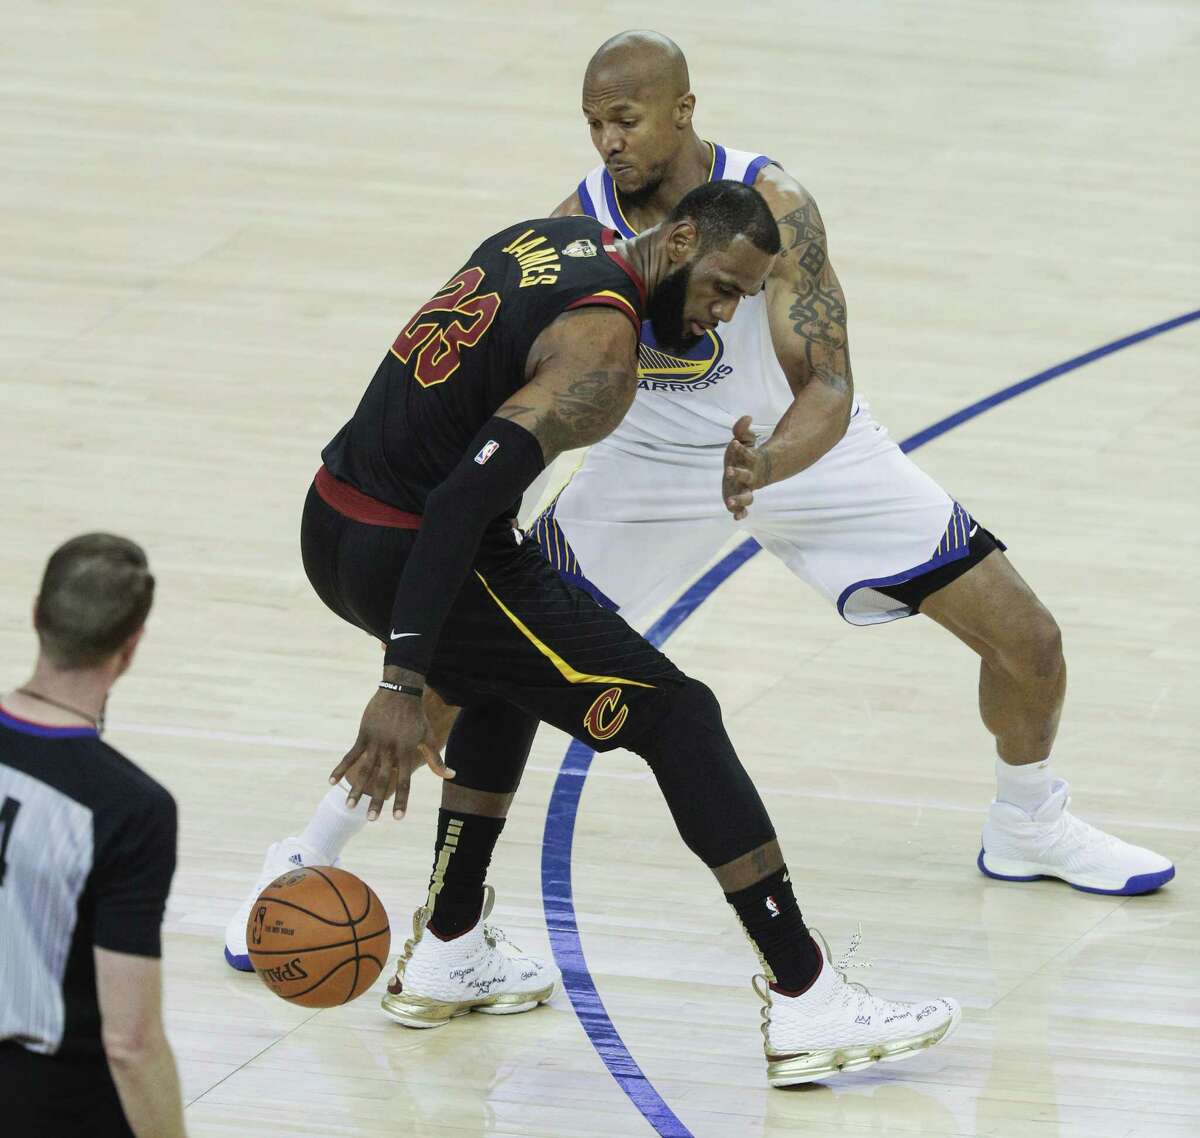 Golden State Warriors' David West defends against Cleveland Cavaliers' LeBron James in the second quarter during game 1 of The NBA Finals between the Golden State Warriors and the Cleveland Cavaliers at Oracle Arena on Thursday, May 31, 2018 in Oakland, Calif.